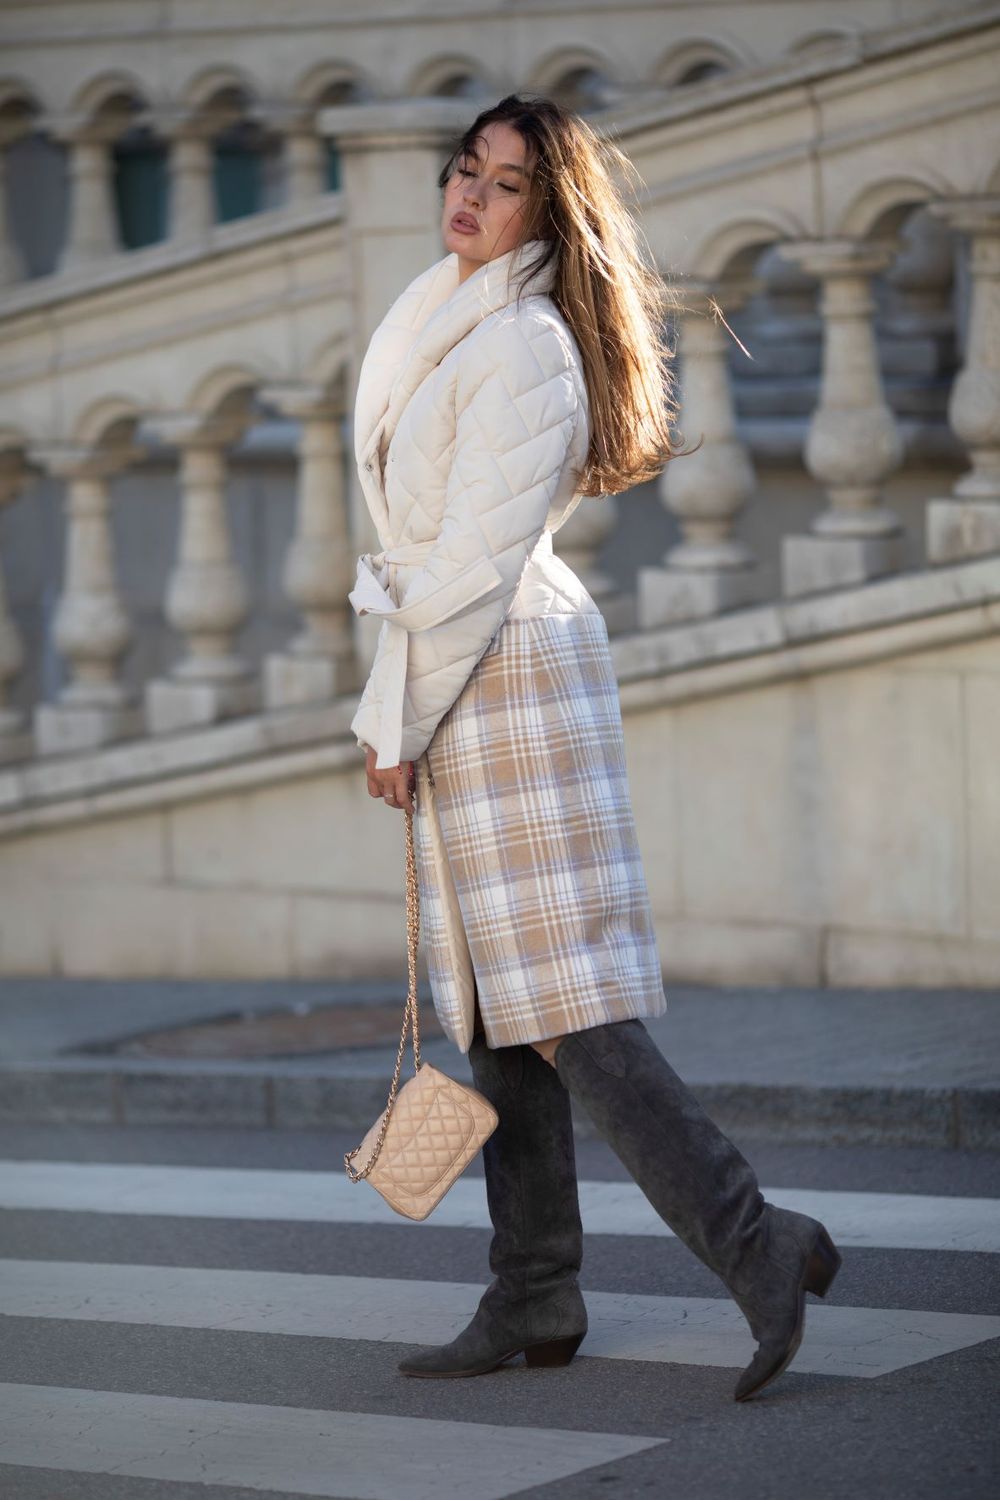 Quilted milk-colored coat in a checkered pattern